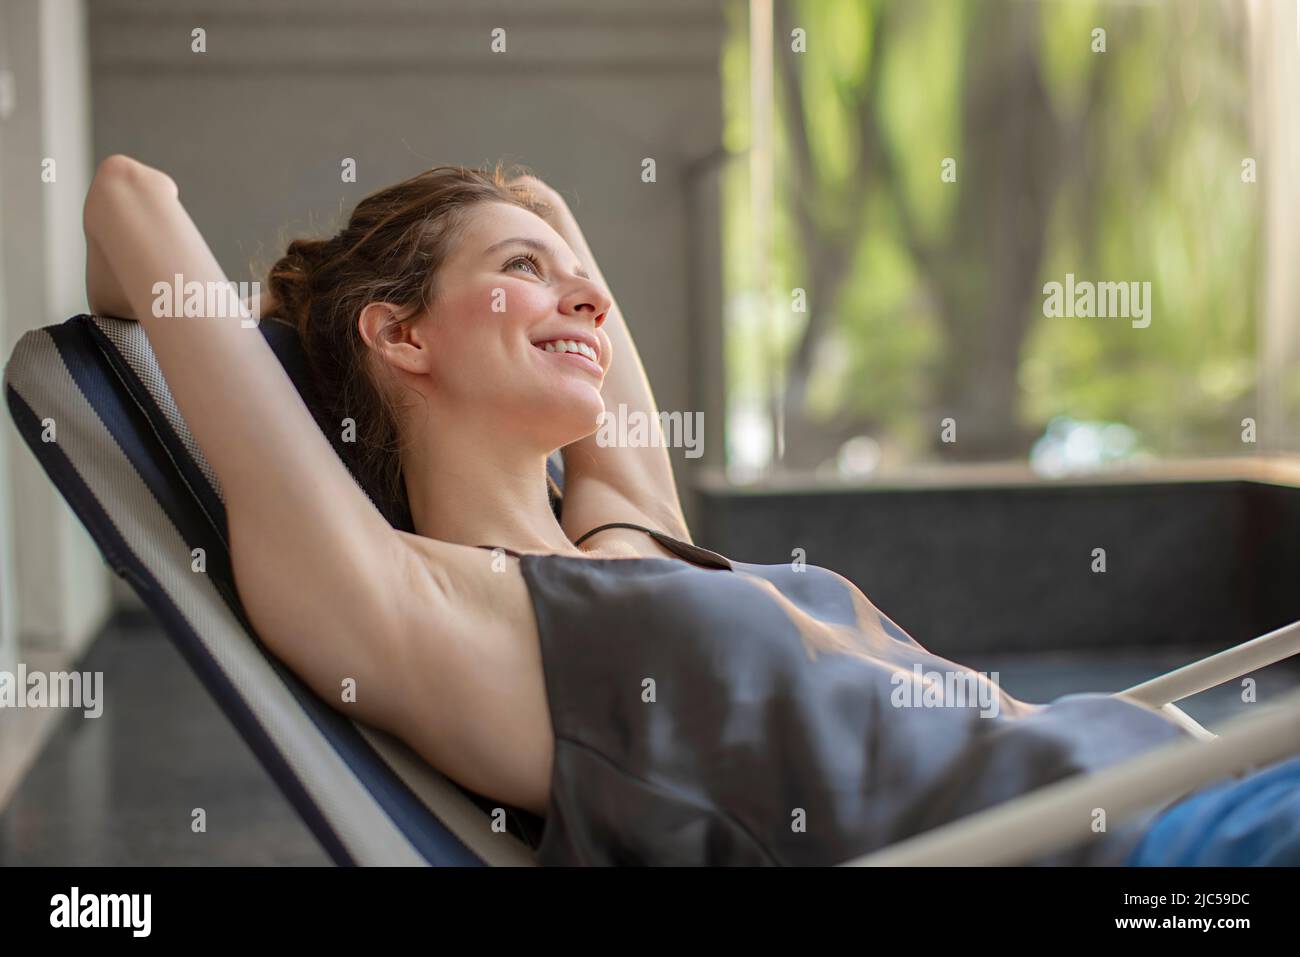 Side profile of a young woman sitting on chair and dreaming Stock Photo